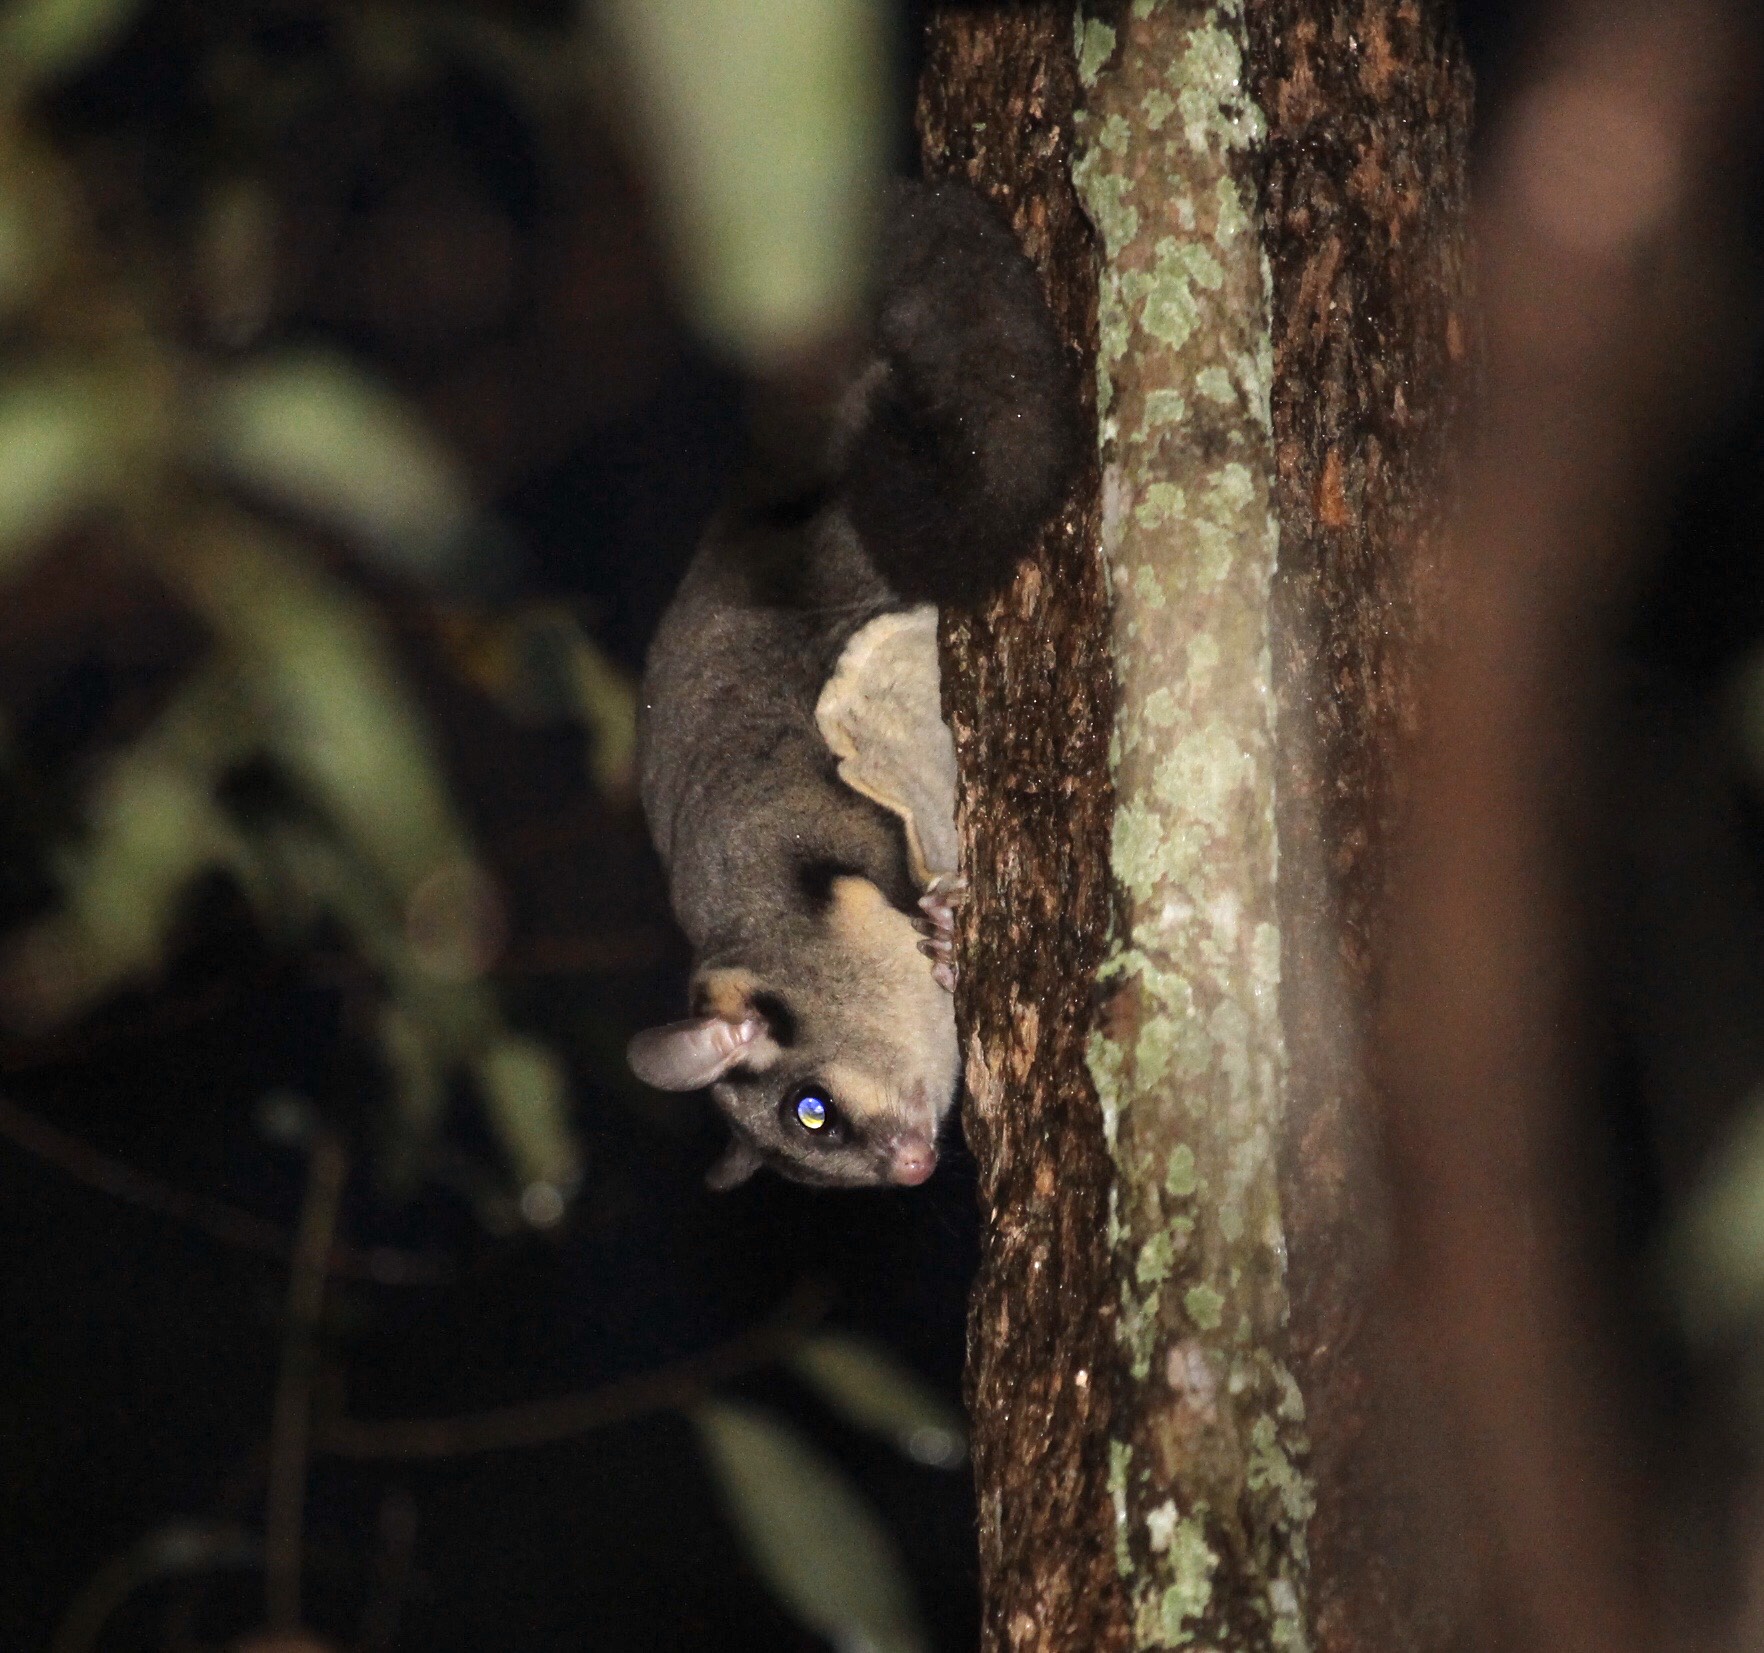 Sugar Gliders out and about, and loving old growth trees